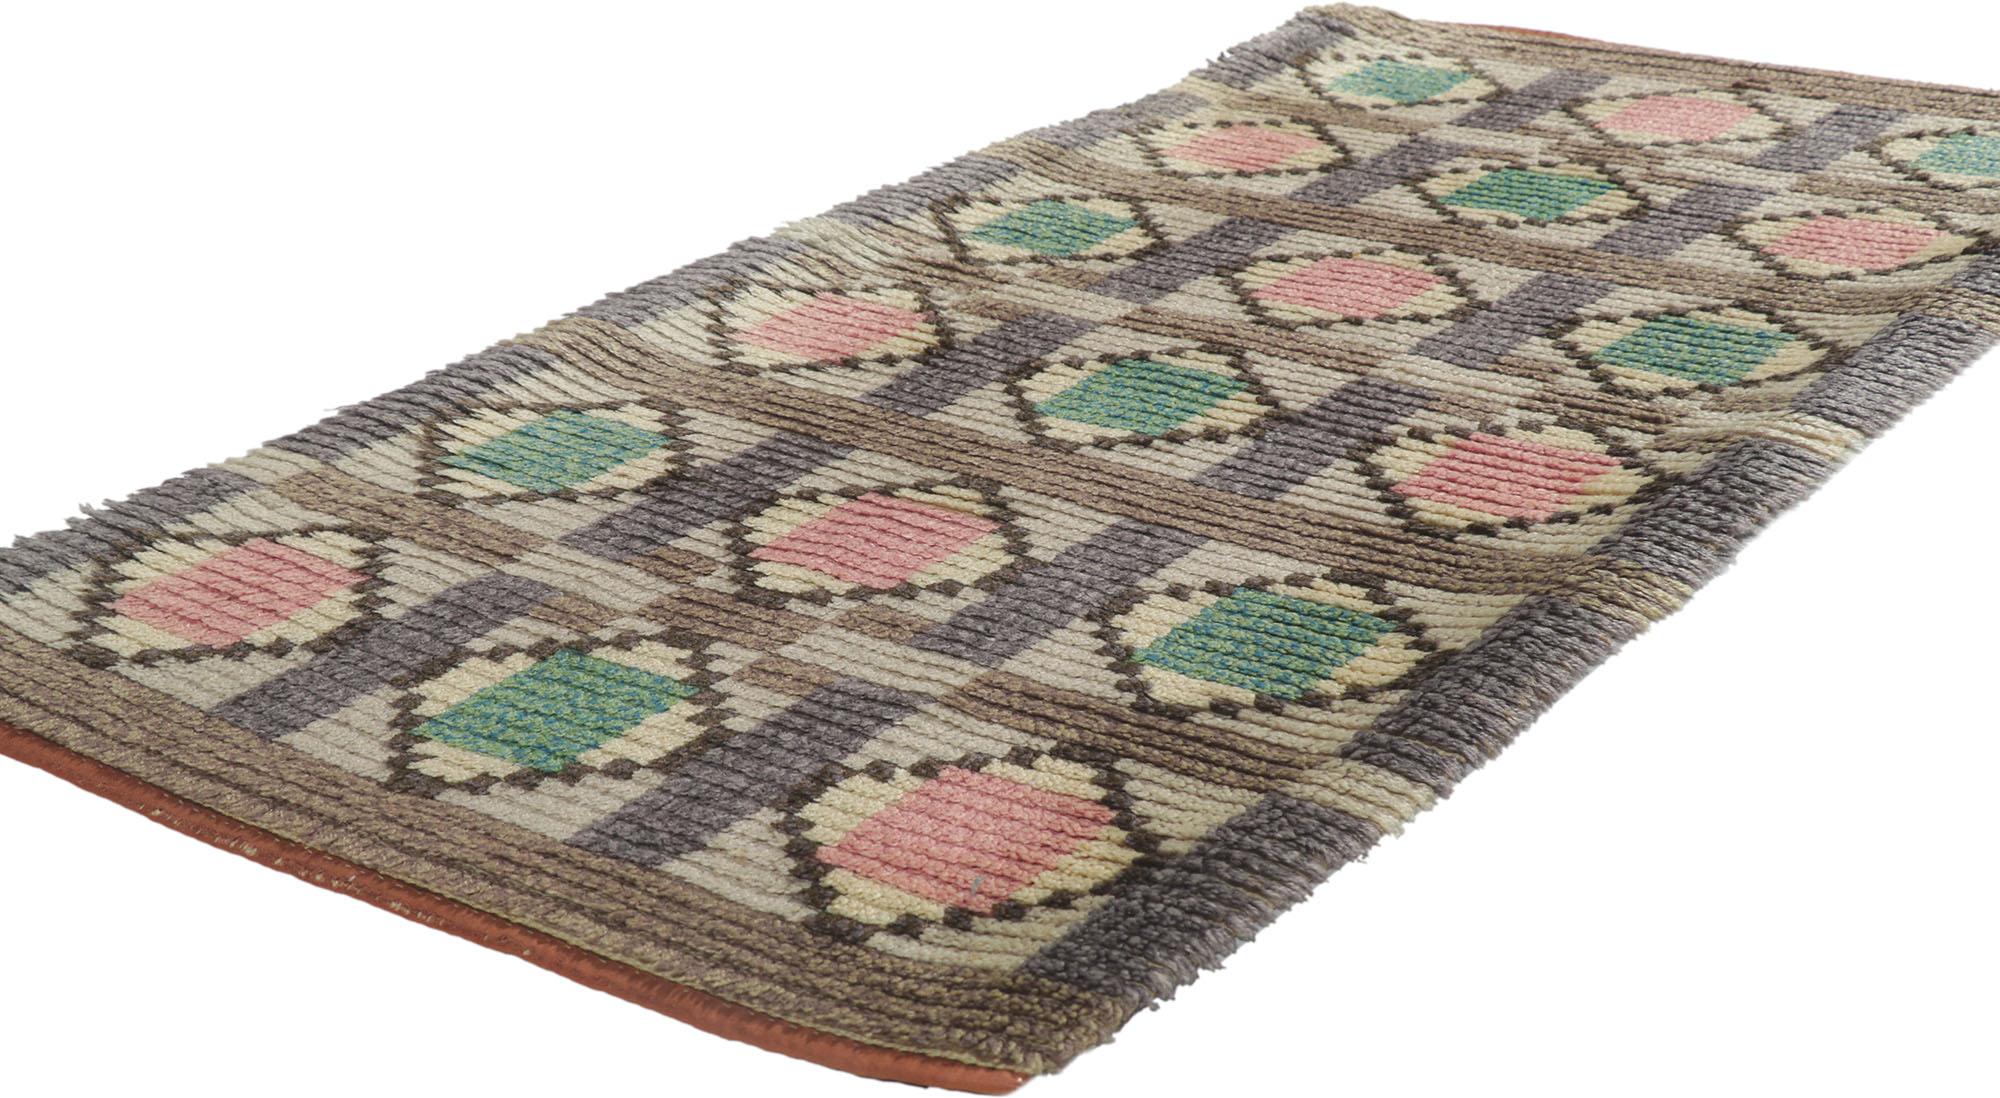 78273 Vintage Finnish Ryijy Rya rug with Scandinavian Modern Style 02'05 x 04'10. Full of tiny details and a bold expressive design combined with folk art tribal style, this hand-knotted wool vintage Finnish Ryijy Rya rug is a captivating vision of